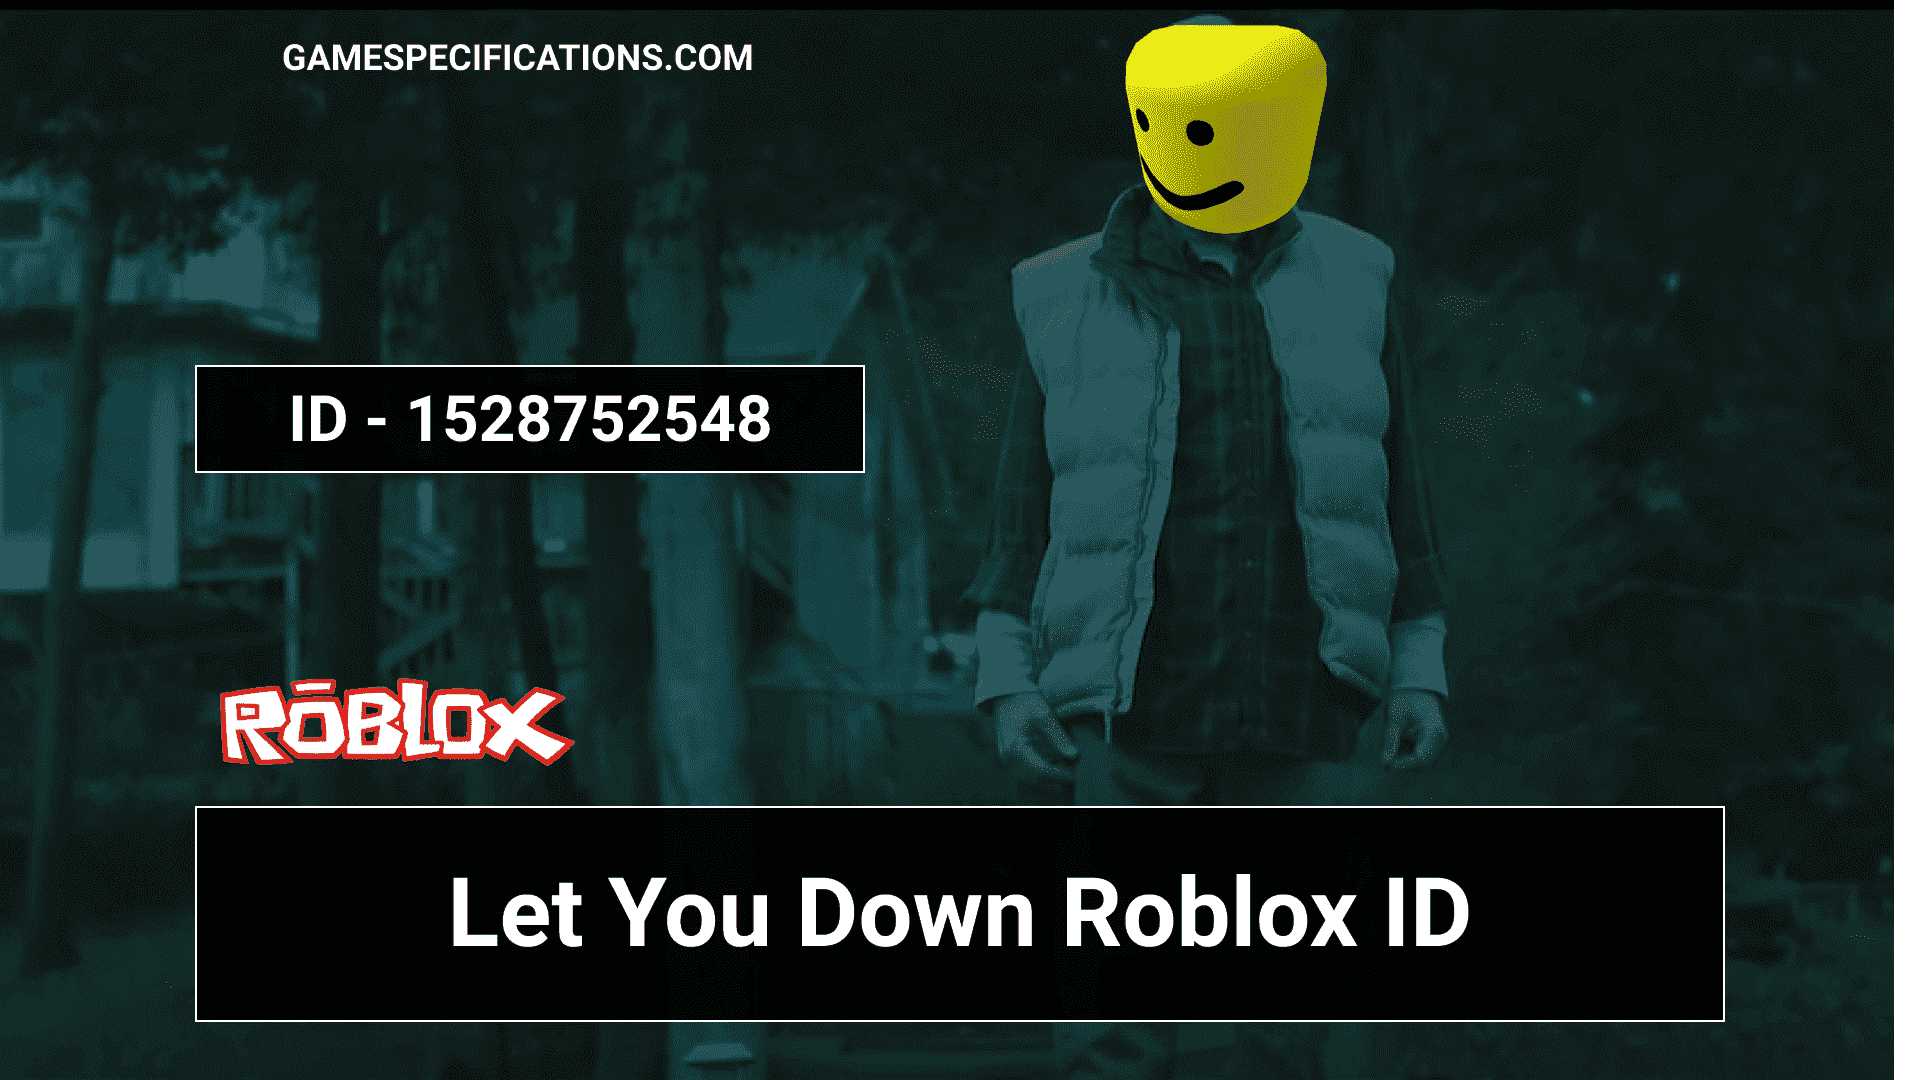 Let You Down Roblox Id Codes To Play The Nf Music 2021 Game Specifications - annoying sound id roblox